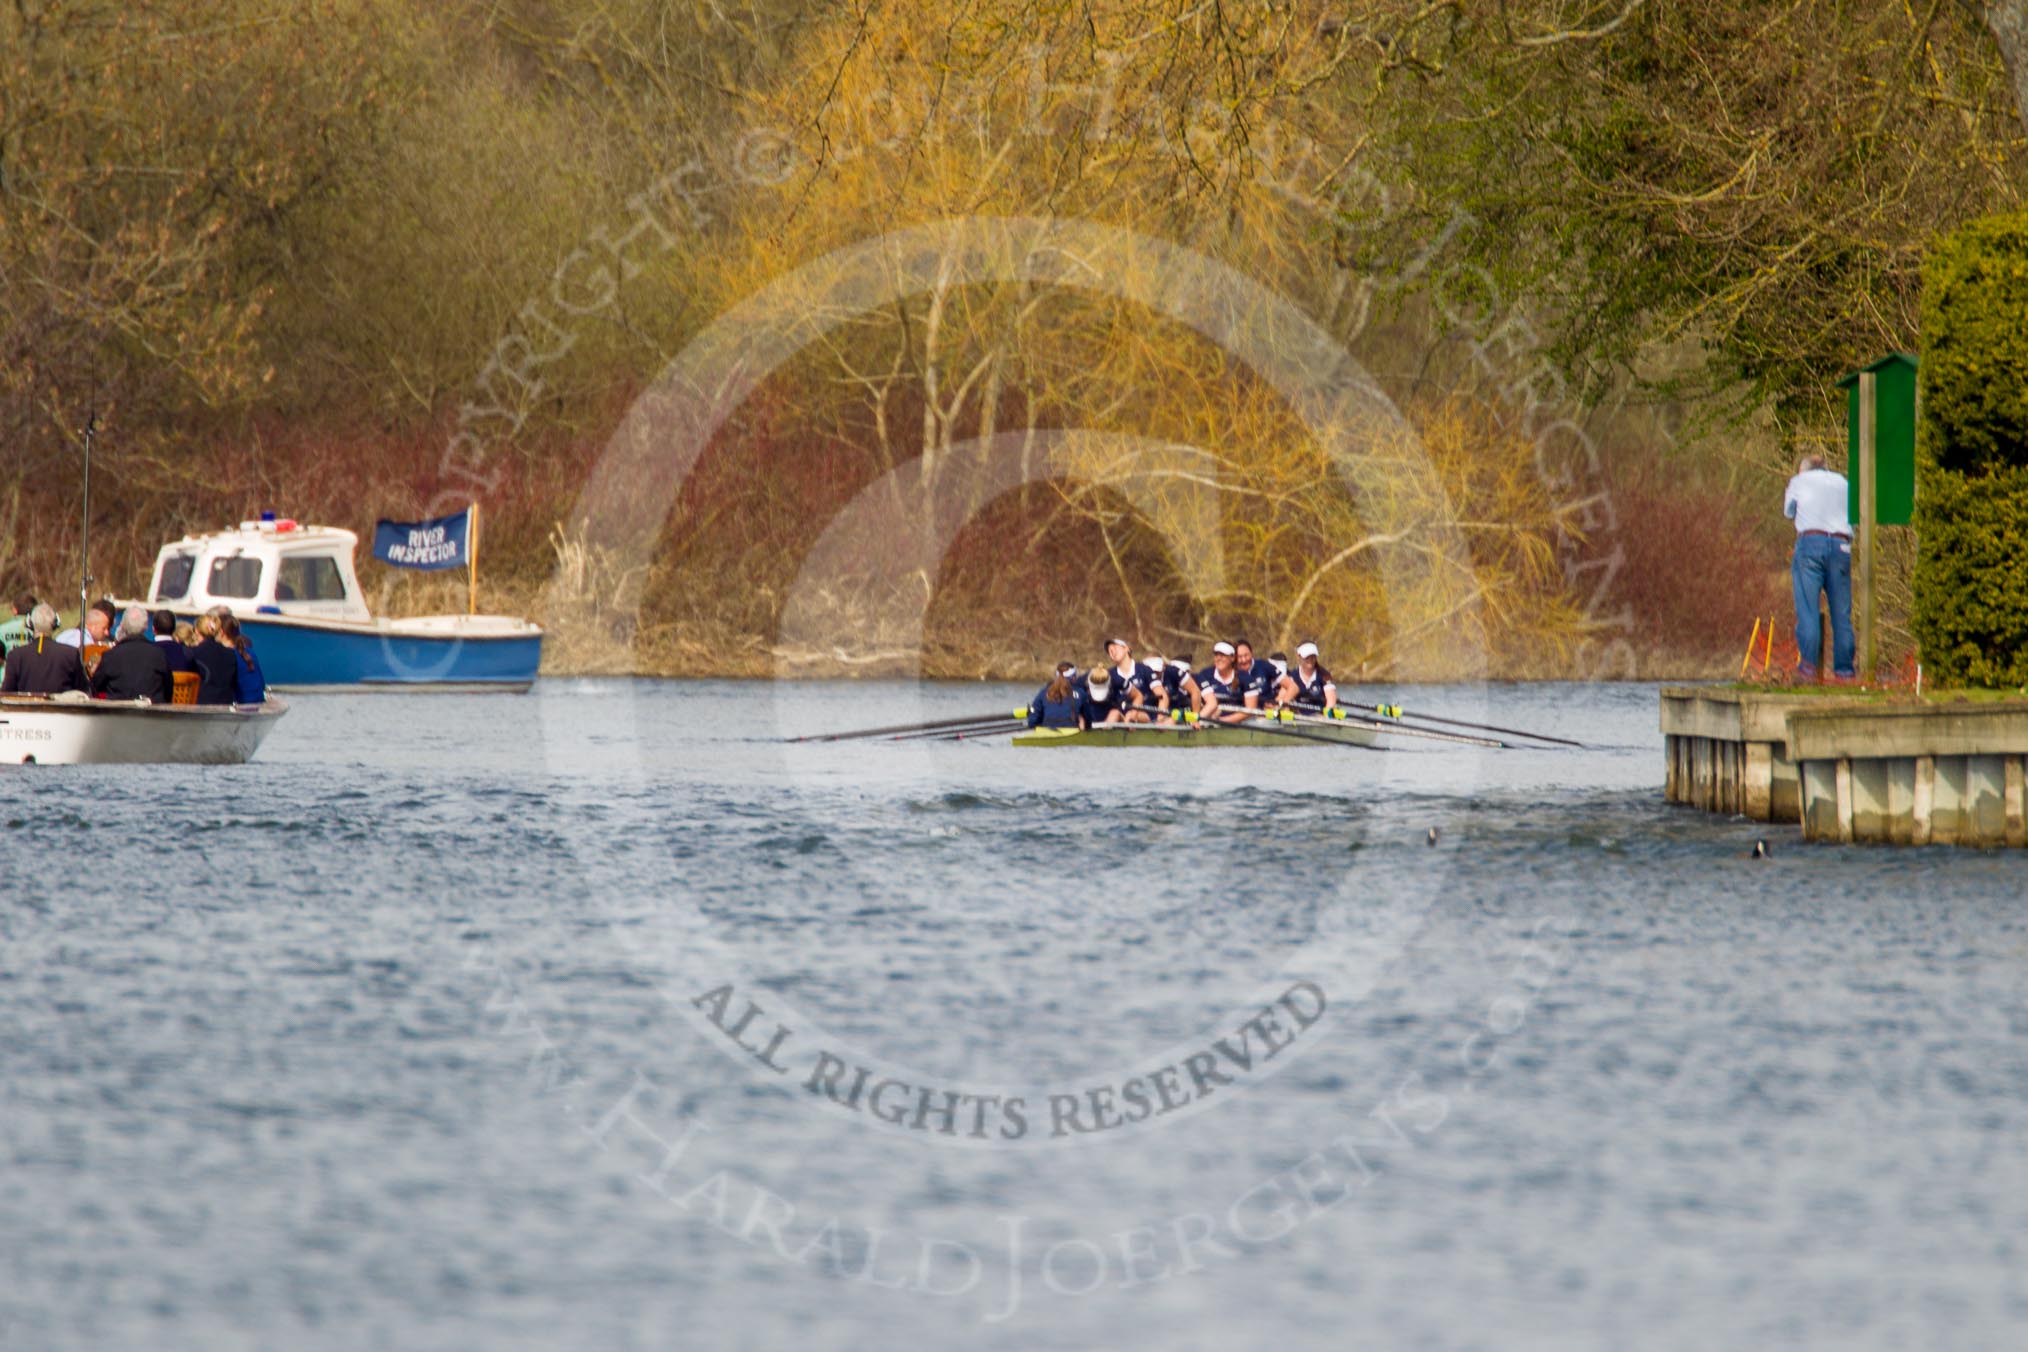 The Women's Boat Race and Henley Boat Races 2014: The Women's Reserves - Osiris v. Blondie race. Osiris (Oxford) has just won the race..
River Thames,
Henley-on-Thames,
Buckinghamshire,
United Kingdom,
on 30 March 2014 at 14:18, image #183